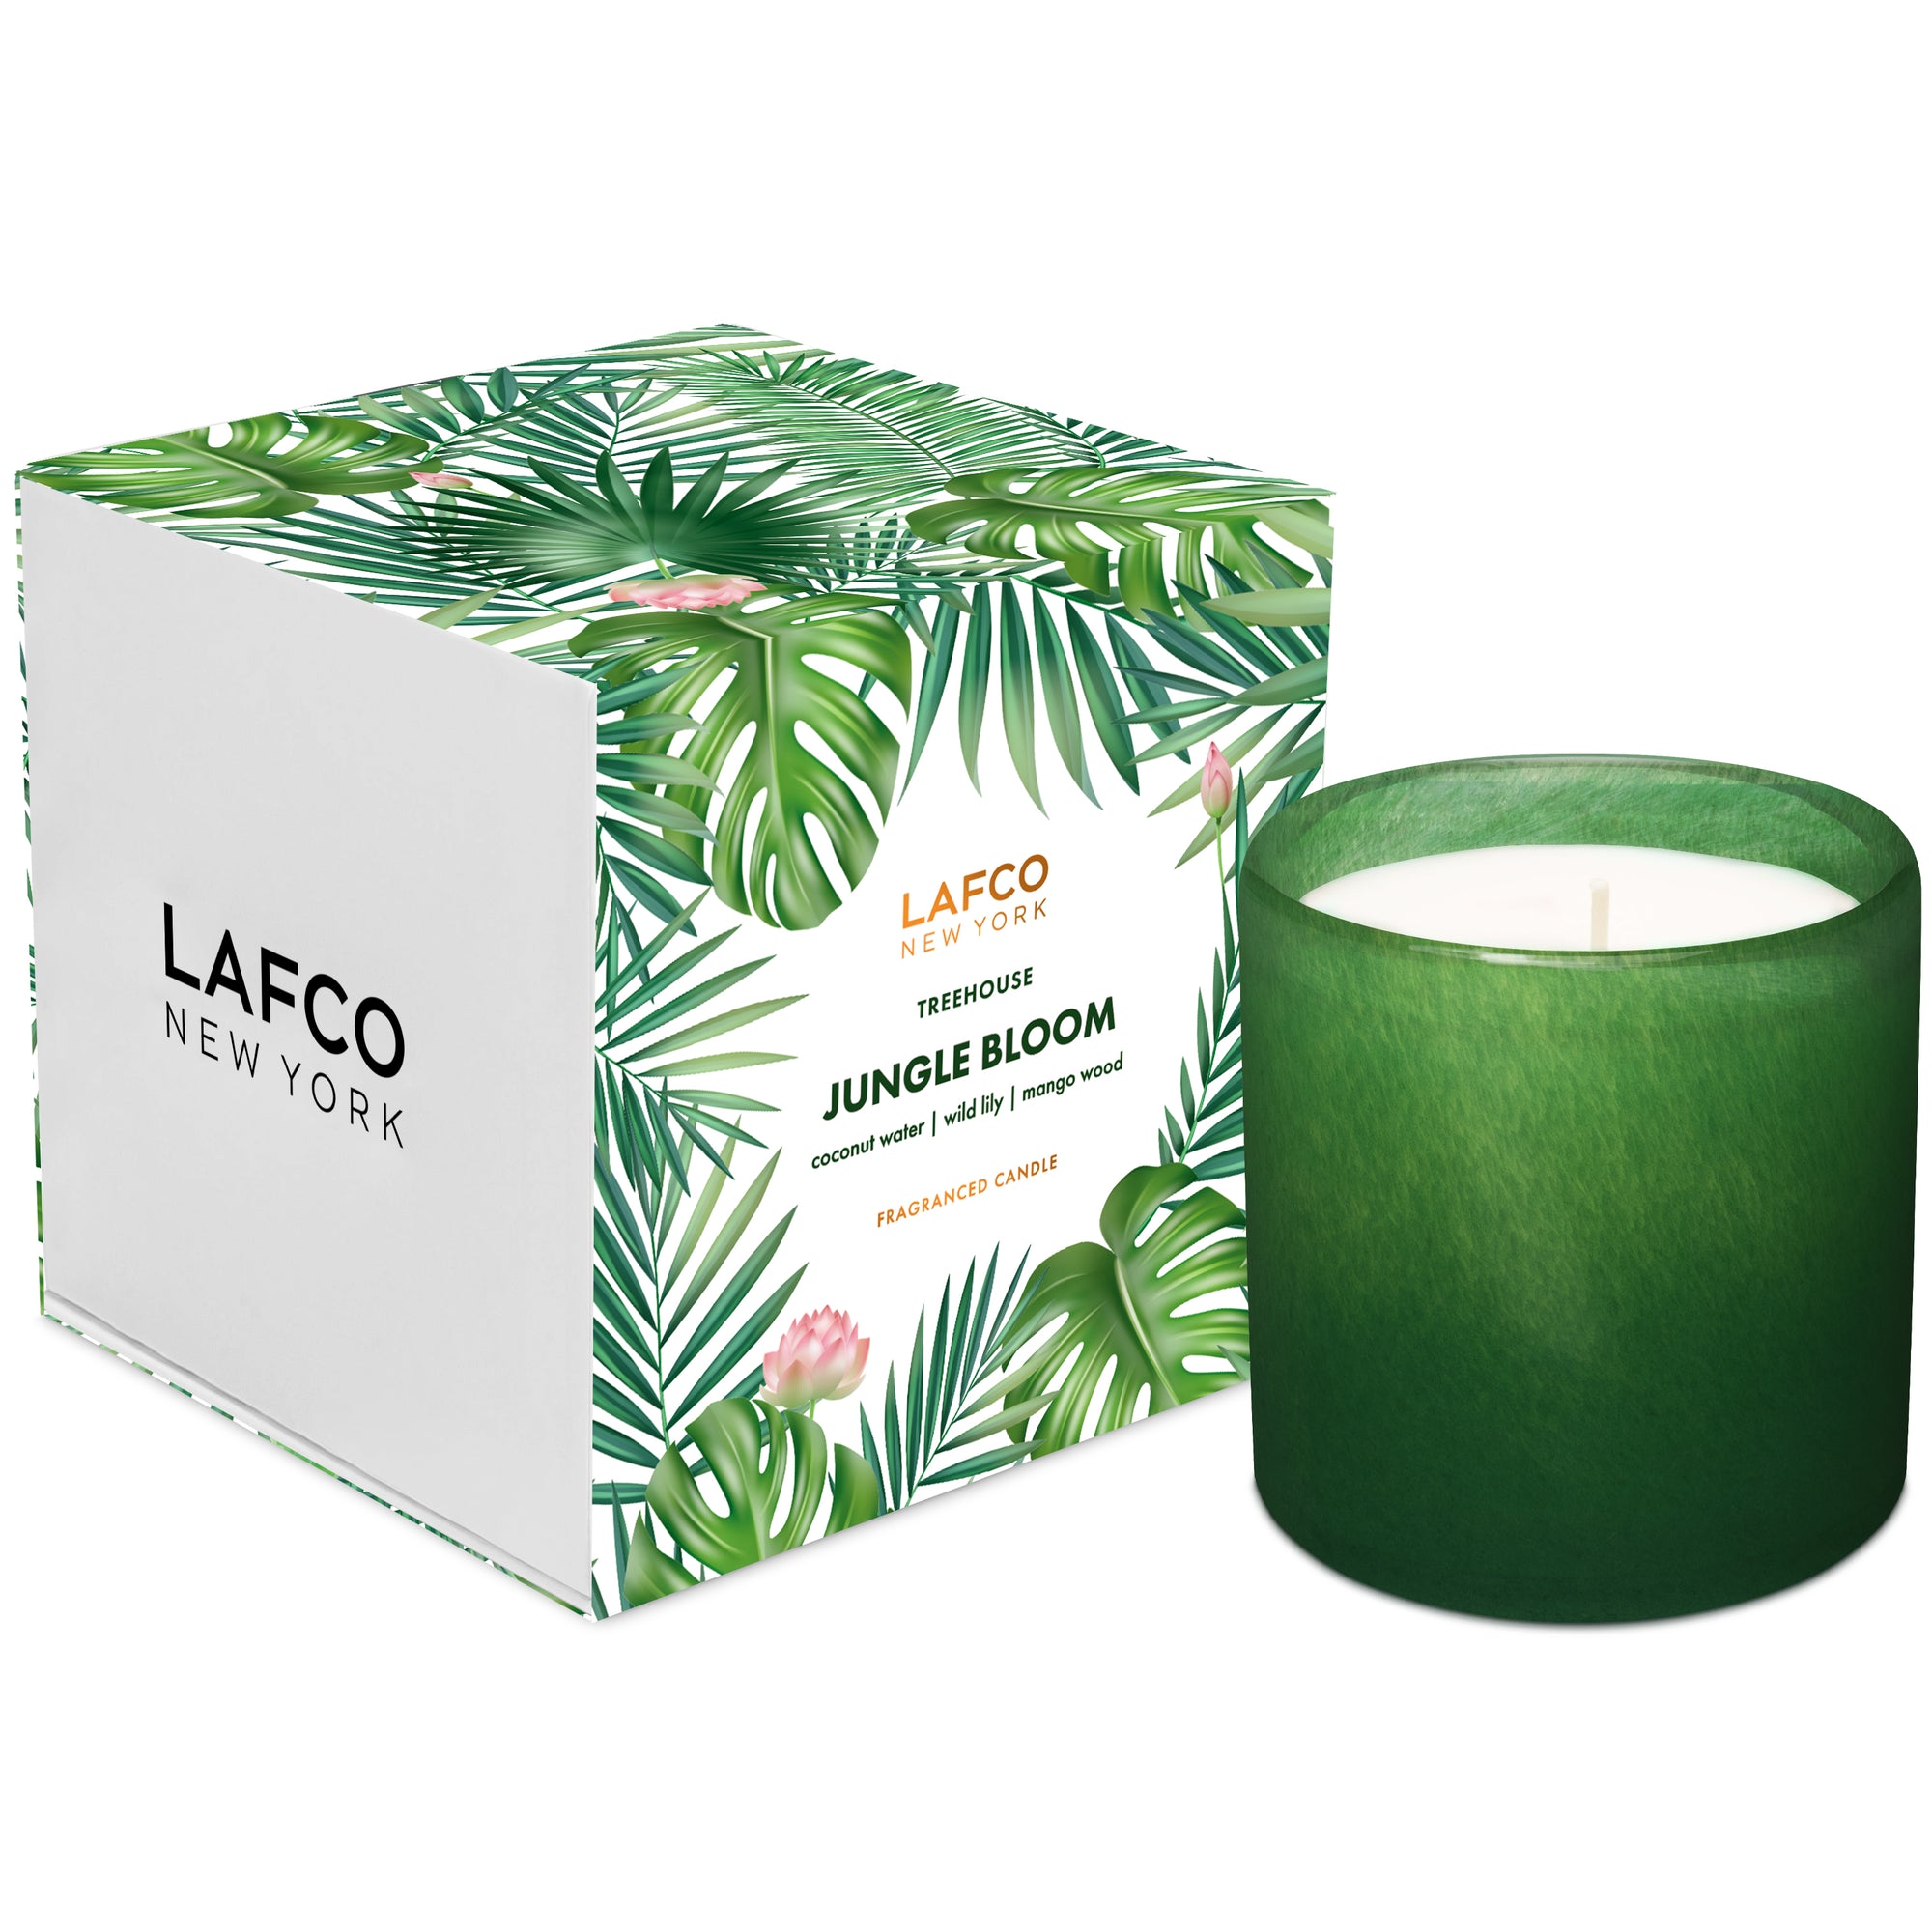 LAFCO 15.5 oz Treehouse (Jungle Bloom) Candle